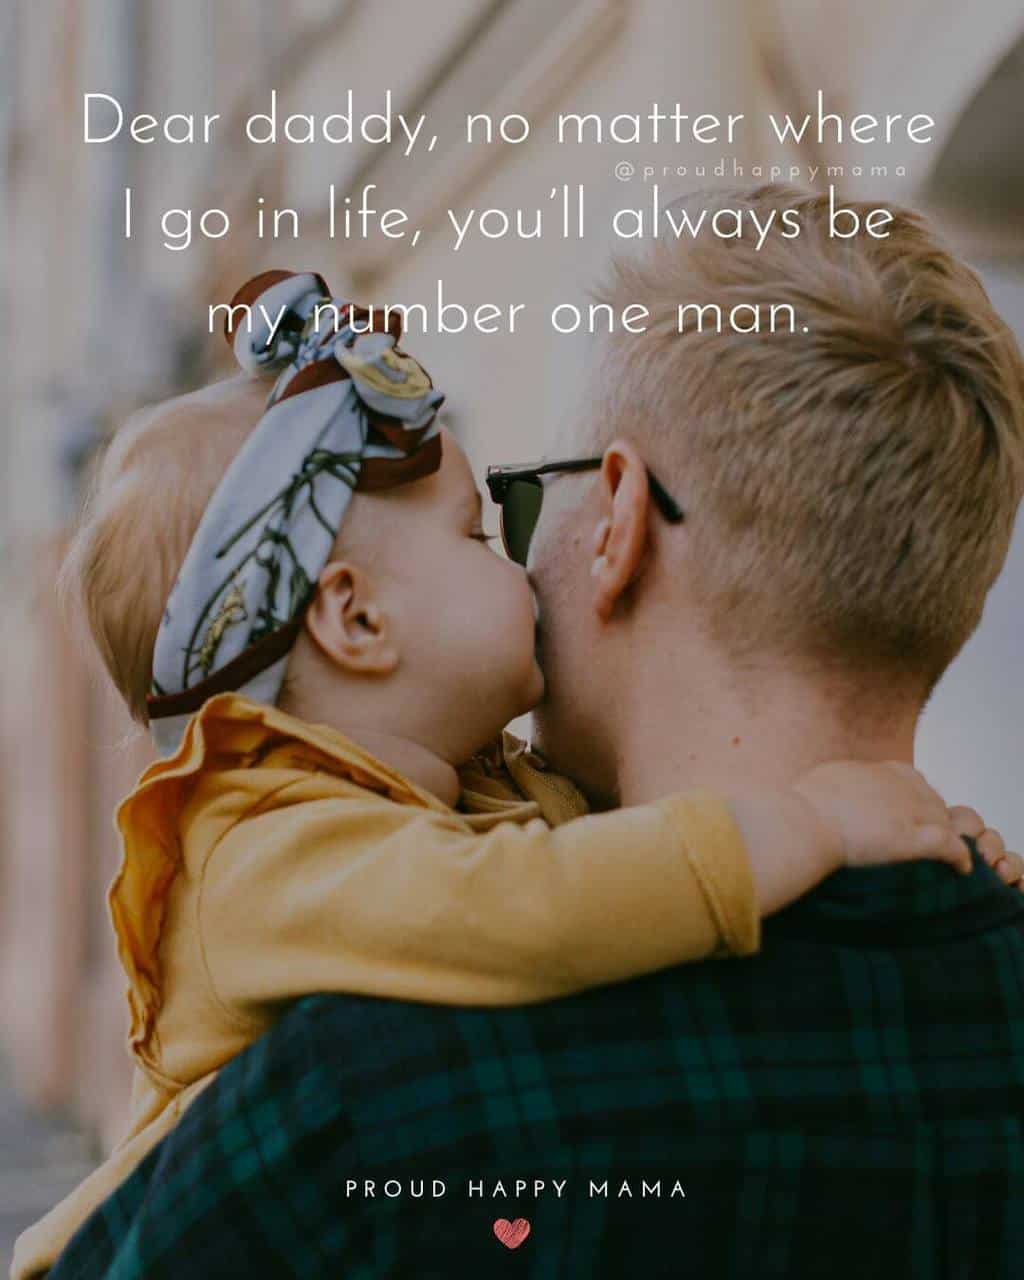 Daddy Daughter Quotes | Dear daddy, no matter where I go in life, you’ll always be my number one man.